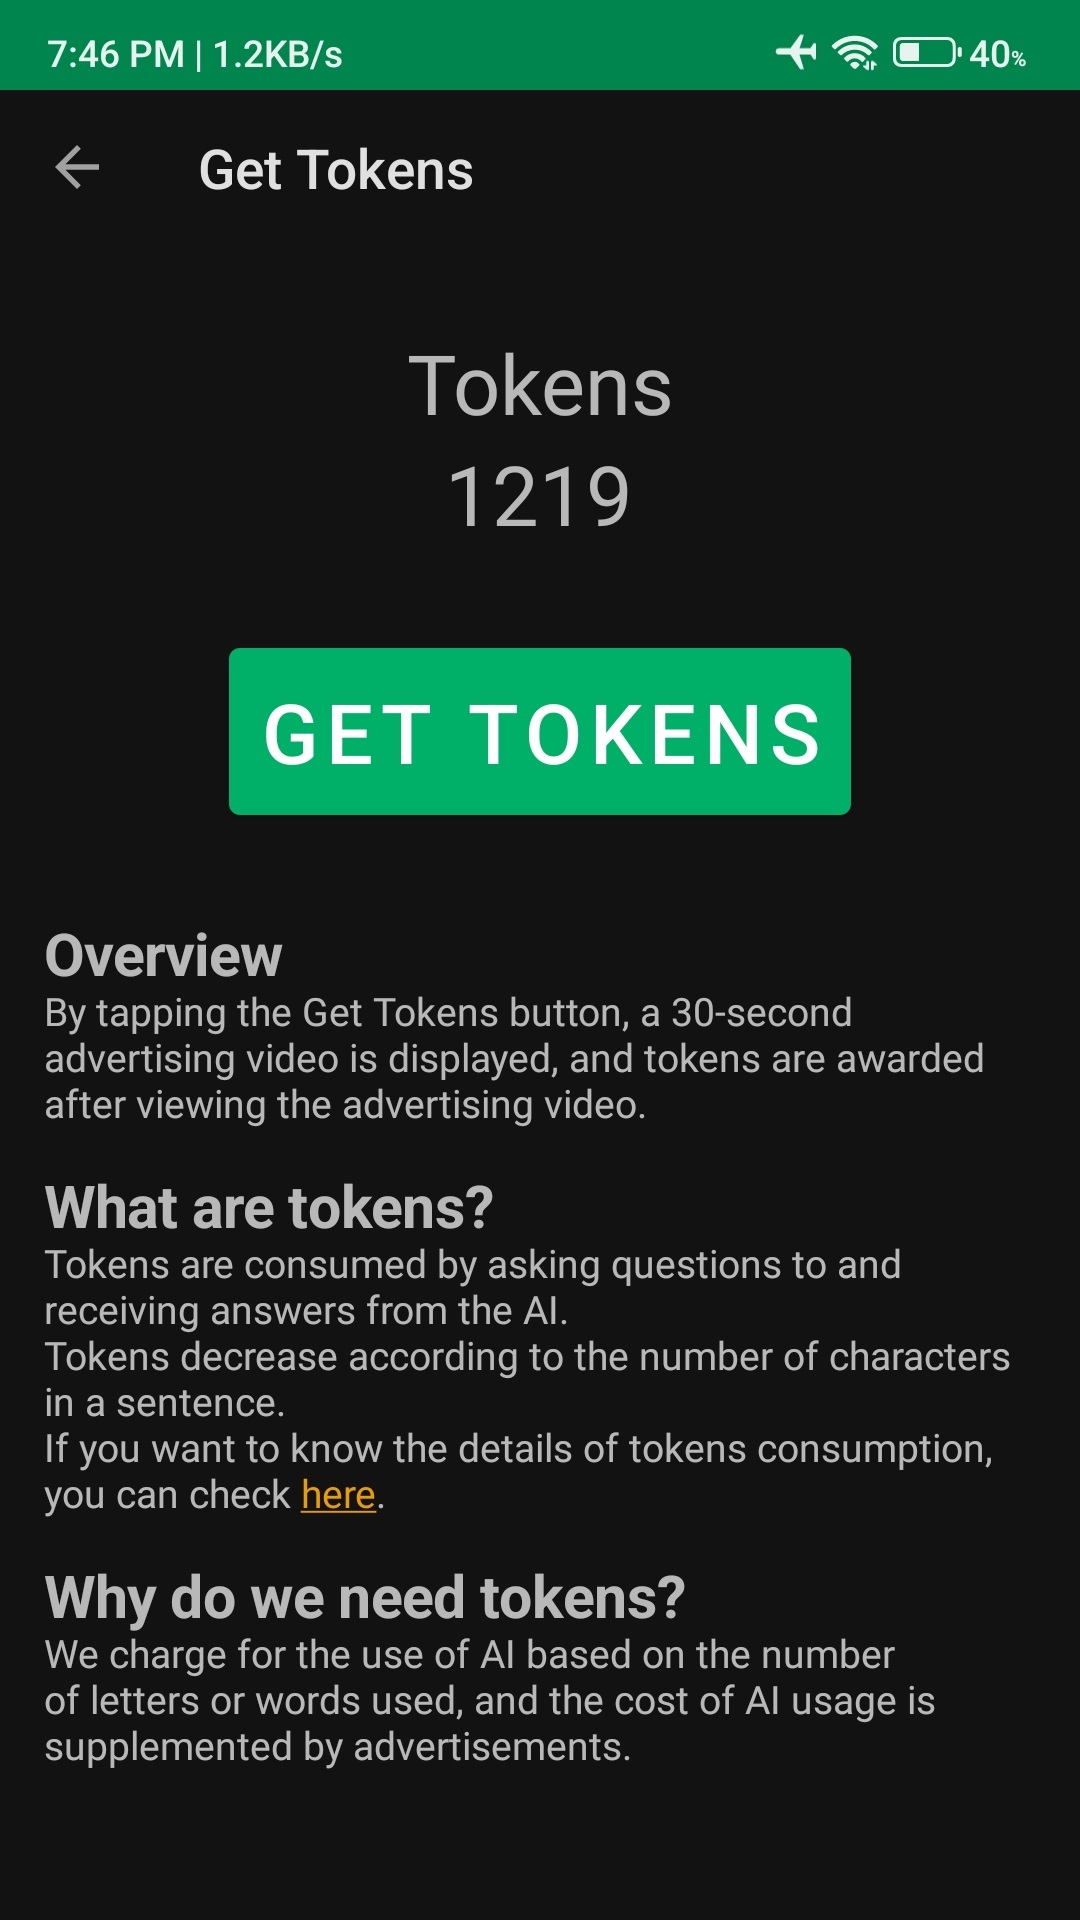 Get Tokens Images